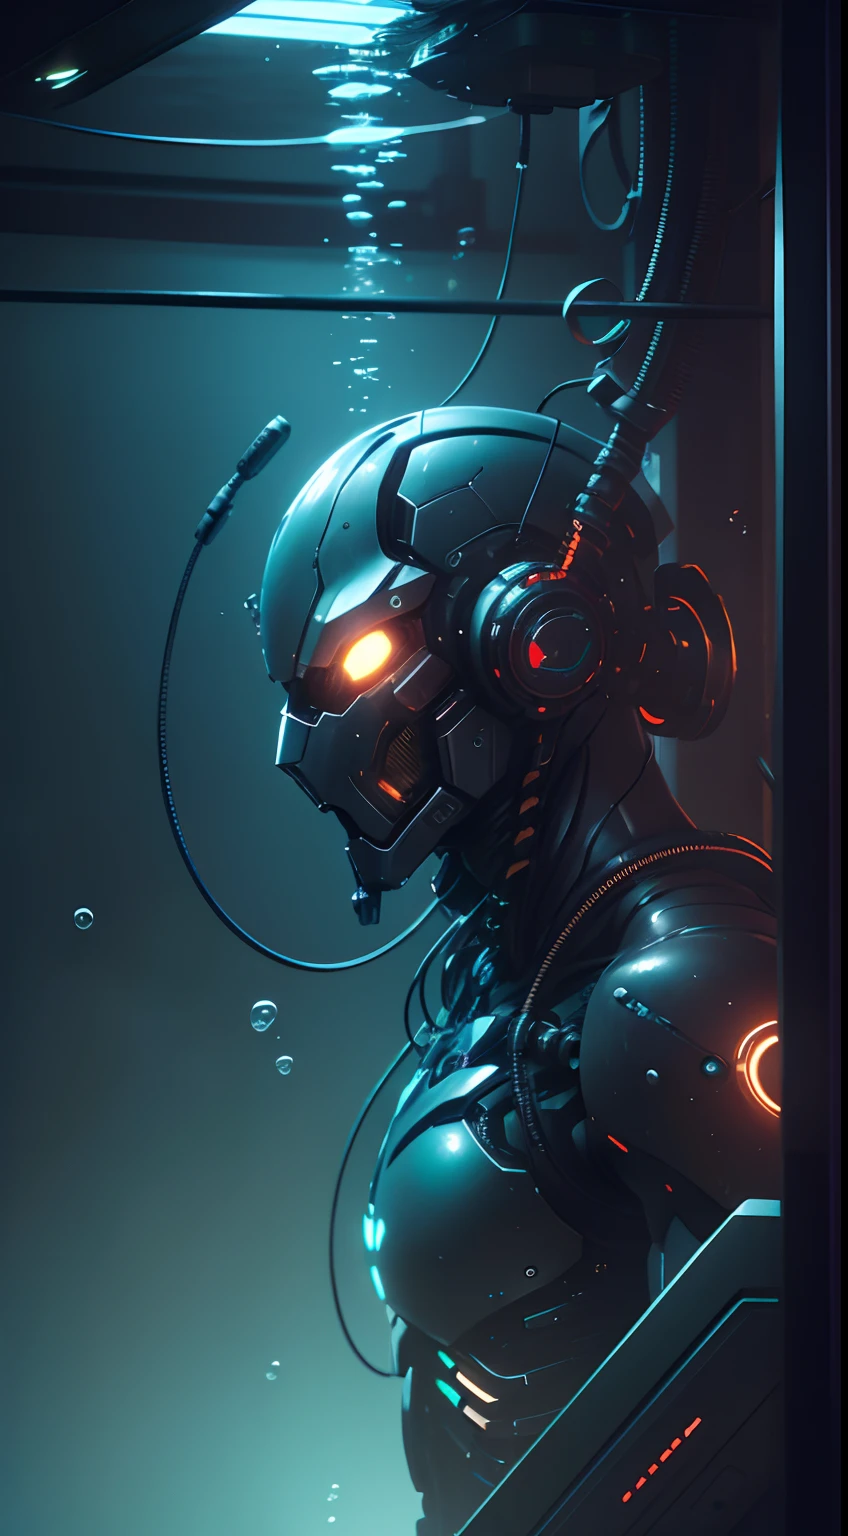 ((masterpiece)), ultra detailed cg render of a cyborg suspended by wires, male robot , (underwater:1.3), close up, machine man, mechanical arms, cyberpunk style, technological, dark, reflections, superficie scattering, 8k, badass, cinematic, glowing eyes,metal head, lights on the chest, wires, tubles, wires coming out the cyborg, neon lights, ominous atmosphere, bubbles, (intricate), UHD, finalelly detailed, high res, realistic, wallpaper, cybertech, dramatic lighting, a danger that awaits, artificial life,unethical, scary, horror. strong, cultivation tank, underwater,